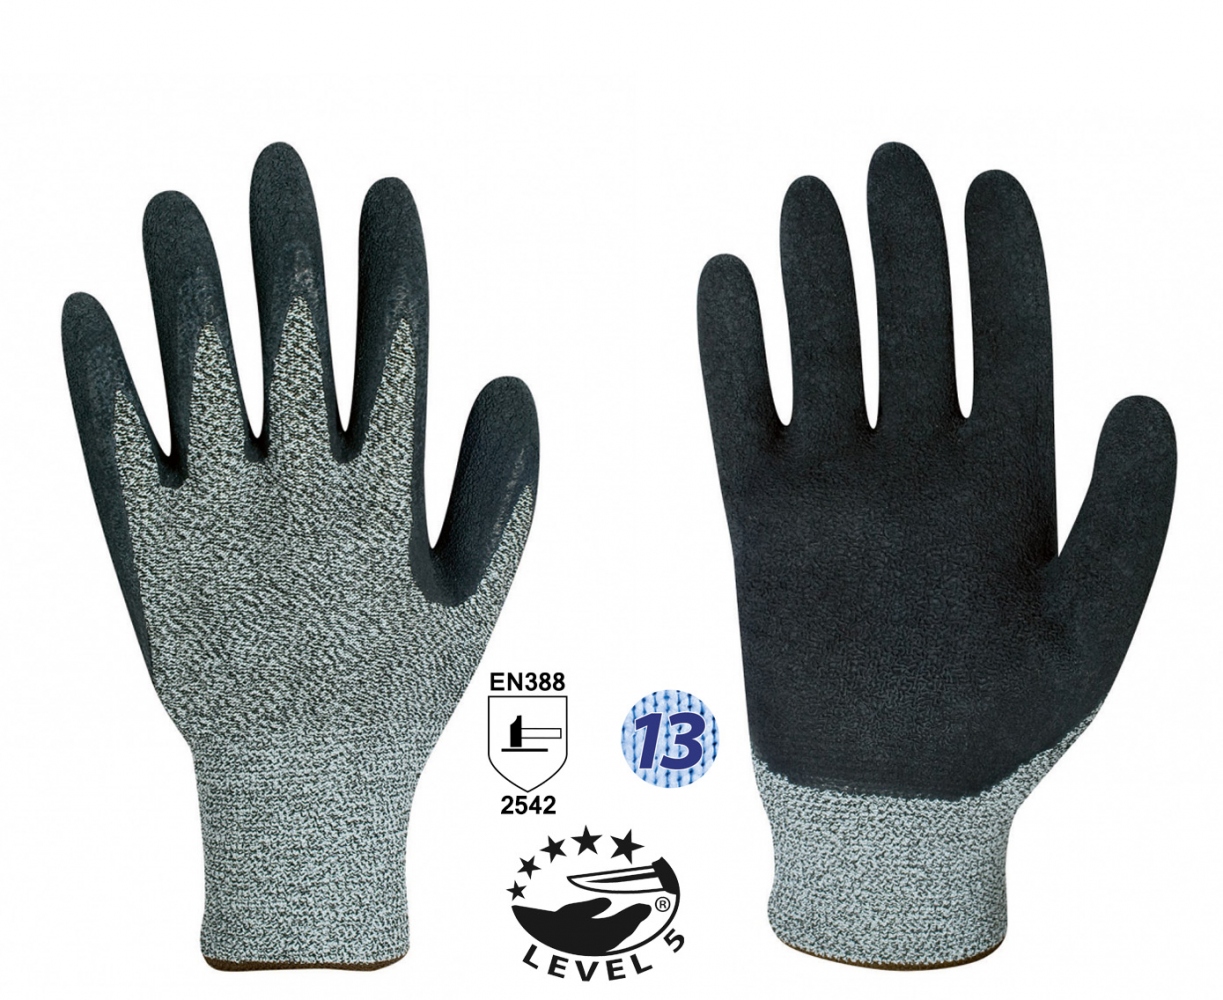 Details about   HAUSHOF 3x Safety Gloves Latex Coated Grip Cut Resistant Working Gloves Level 5 